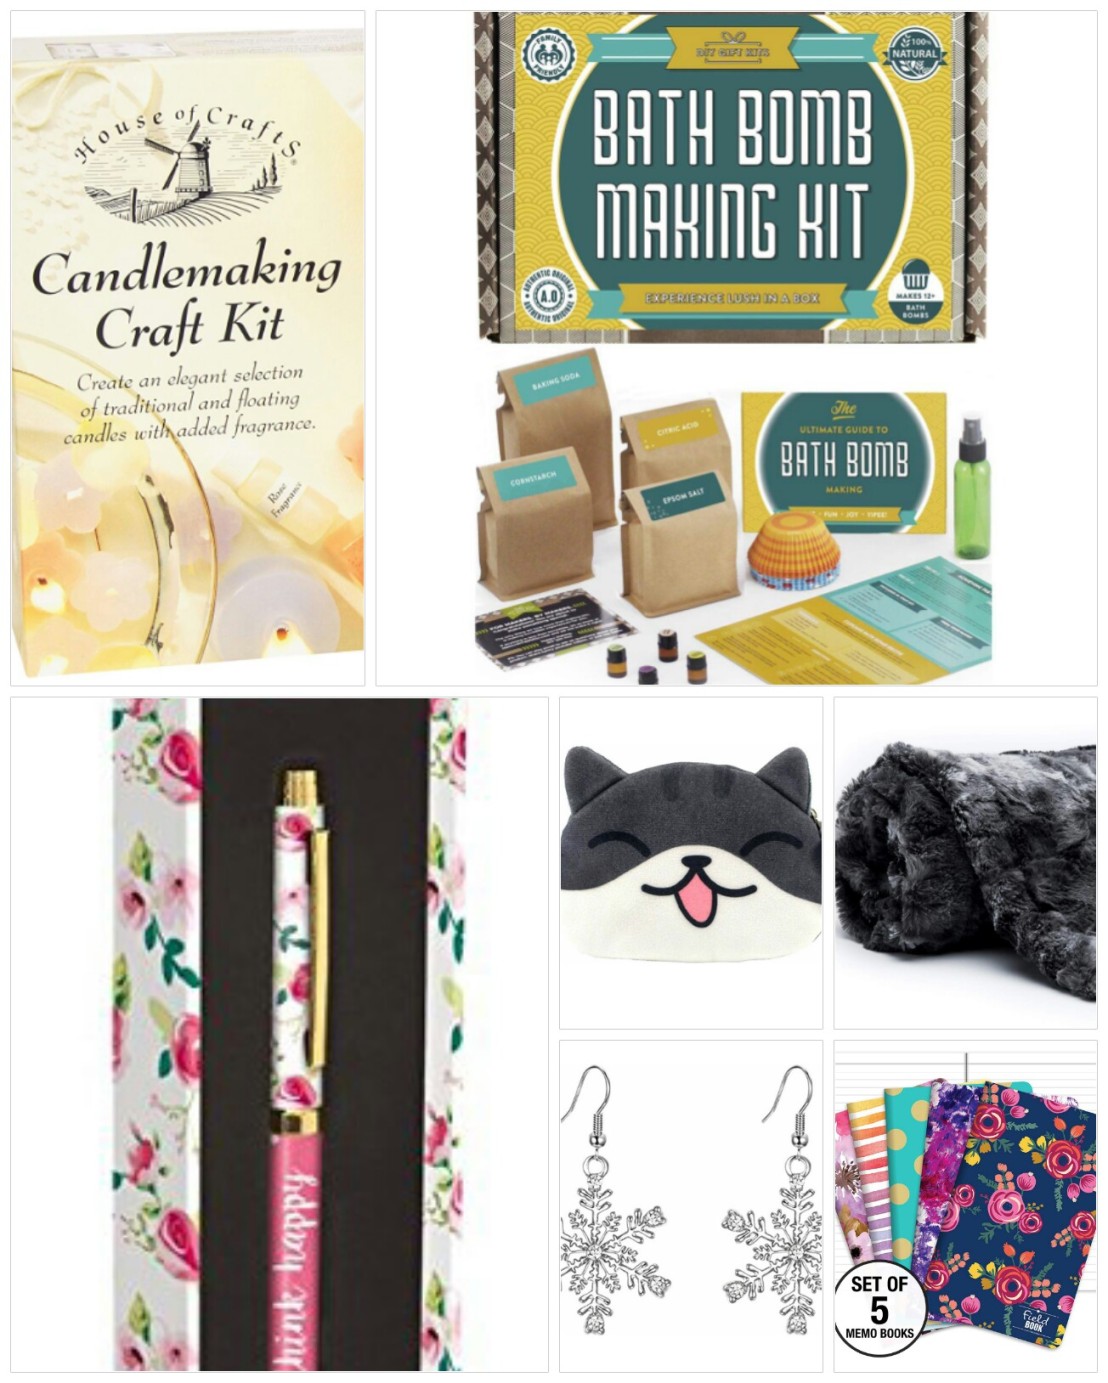 A collage of Christmas gifts ideas for her - part 2